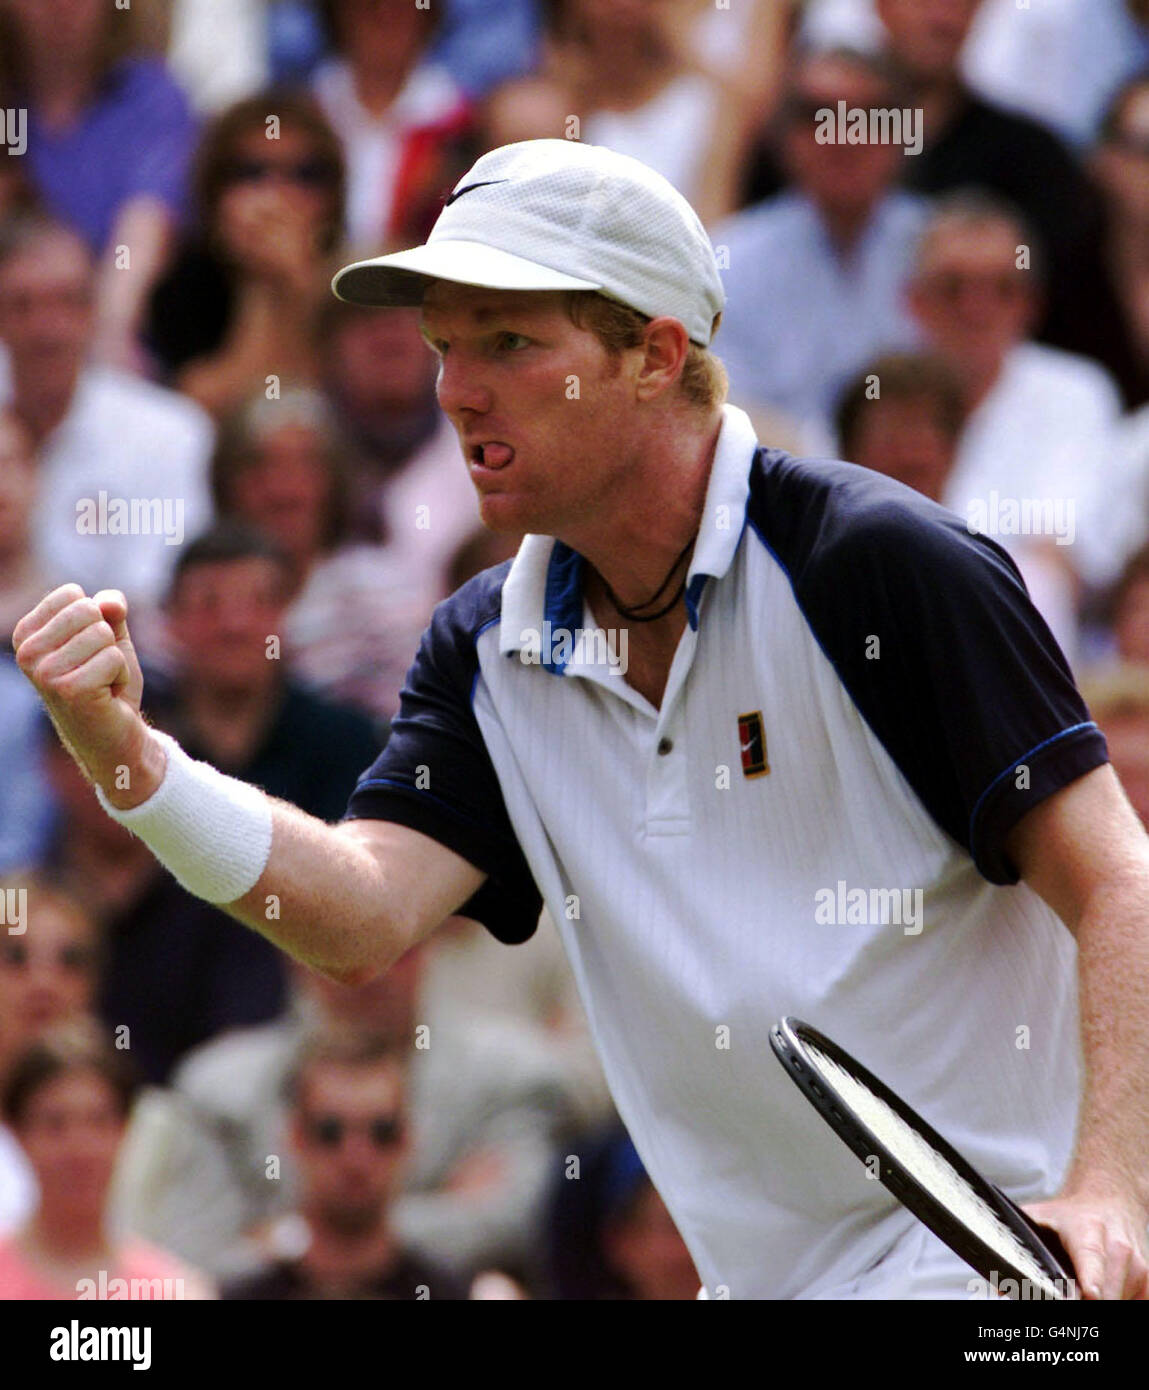 American Jim Courier celebrates after winning another set during his match at Wimbledon against Tim Henman. Henman defeated Courier 4-6, 7-5, 7-5, 6-7, 9-7. Stock Photo